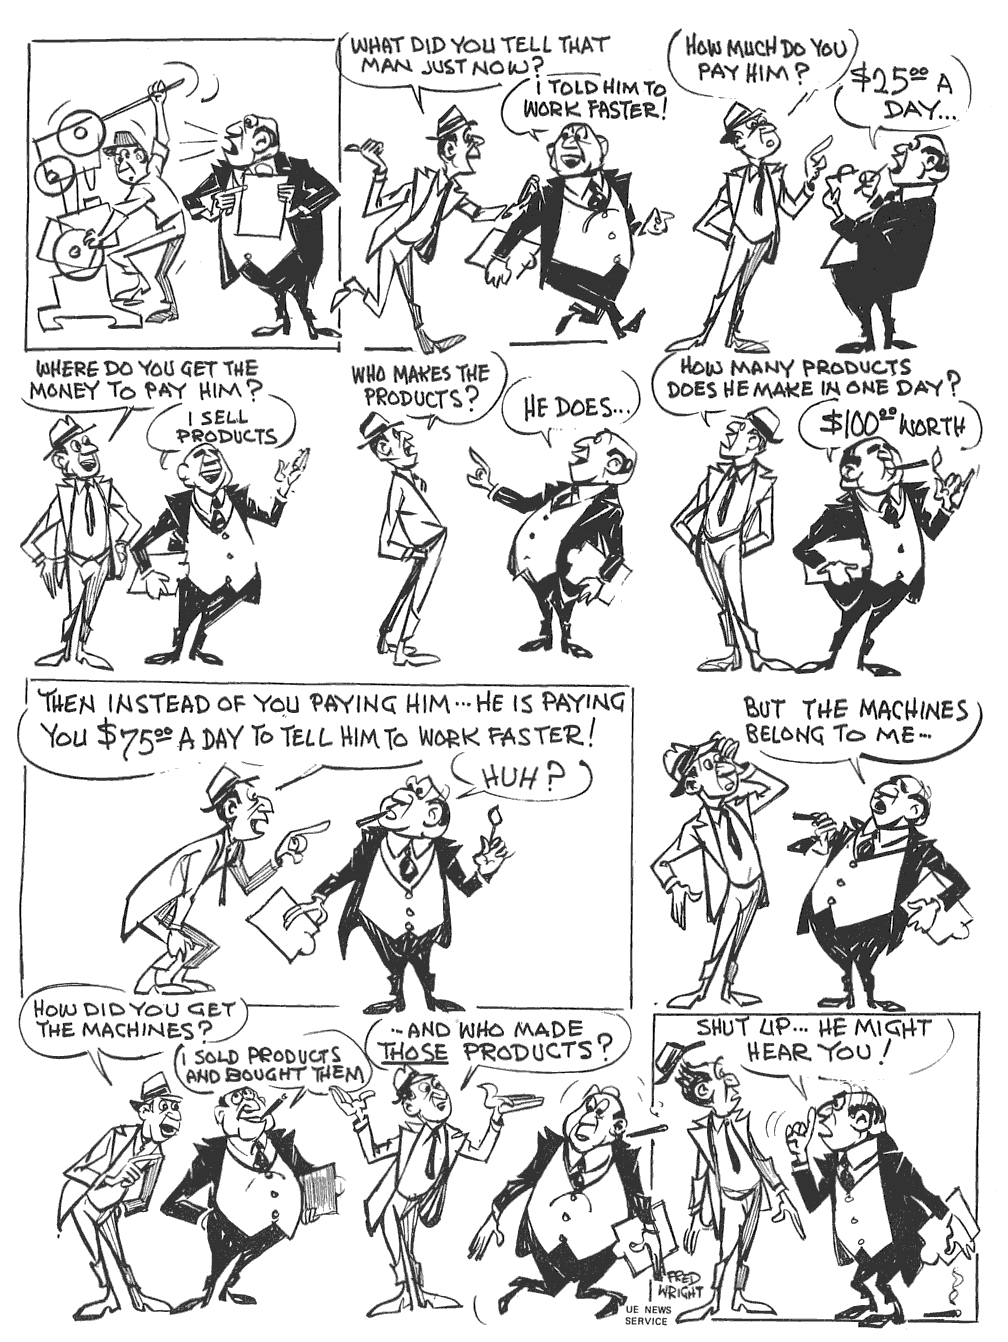 Fred Wright cartoon explaining how bosses exploit workers by paying them less than the value they create